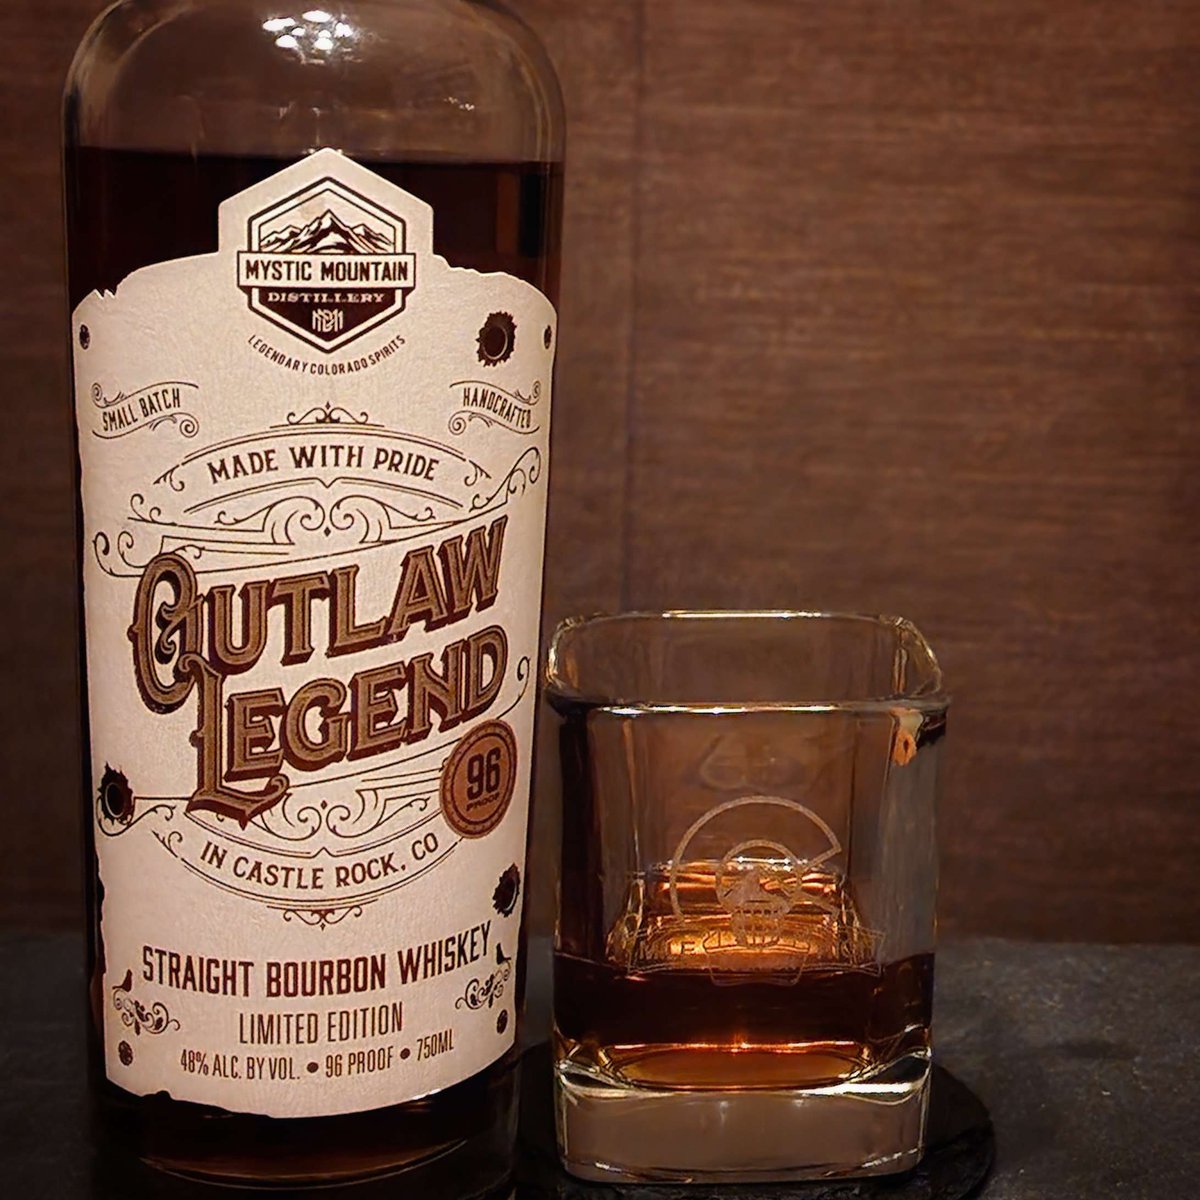 Continuing #BourbonHeritageMonth, I have this review from last years @MysticMtn Outlaw Legend release-leading to a review coming in the next few days. 👀
#Colorado #Whiskey #Bourbon #Legend 

milehighbourbon.com/mystic-mountai…